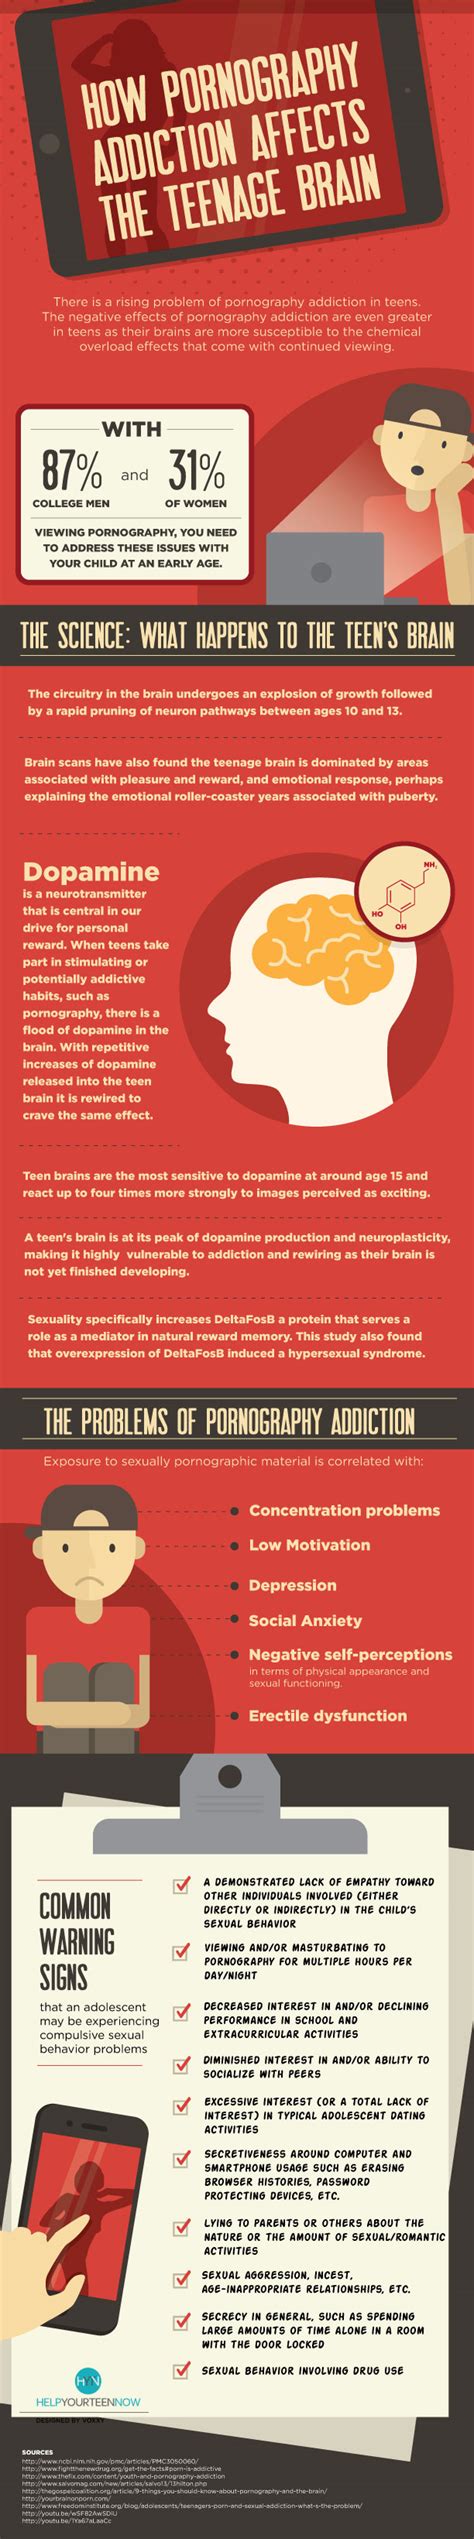 Learn How Pornography Addiction Affects The Teenage Brain Infographic